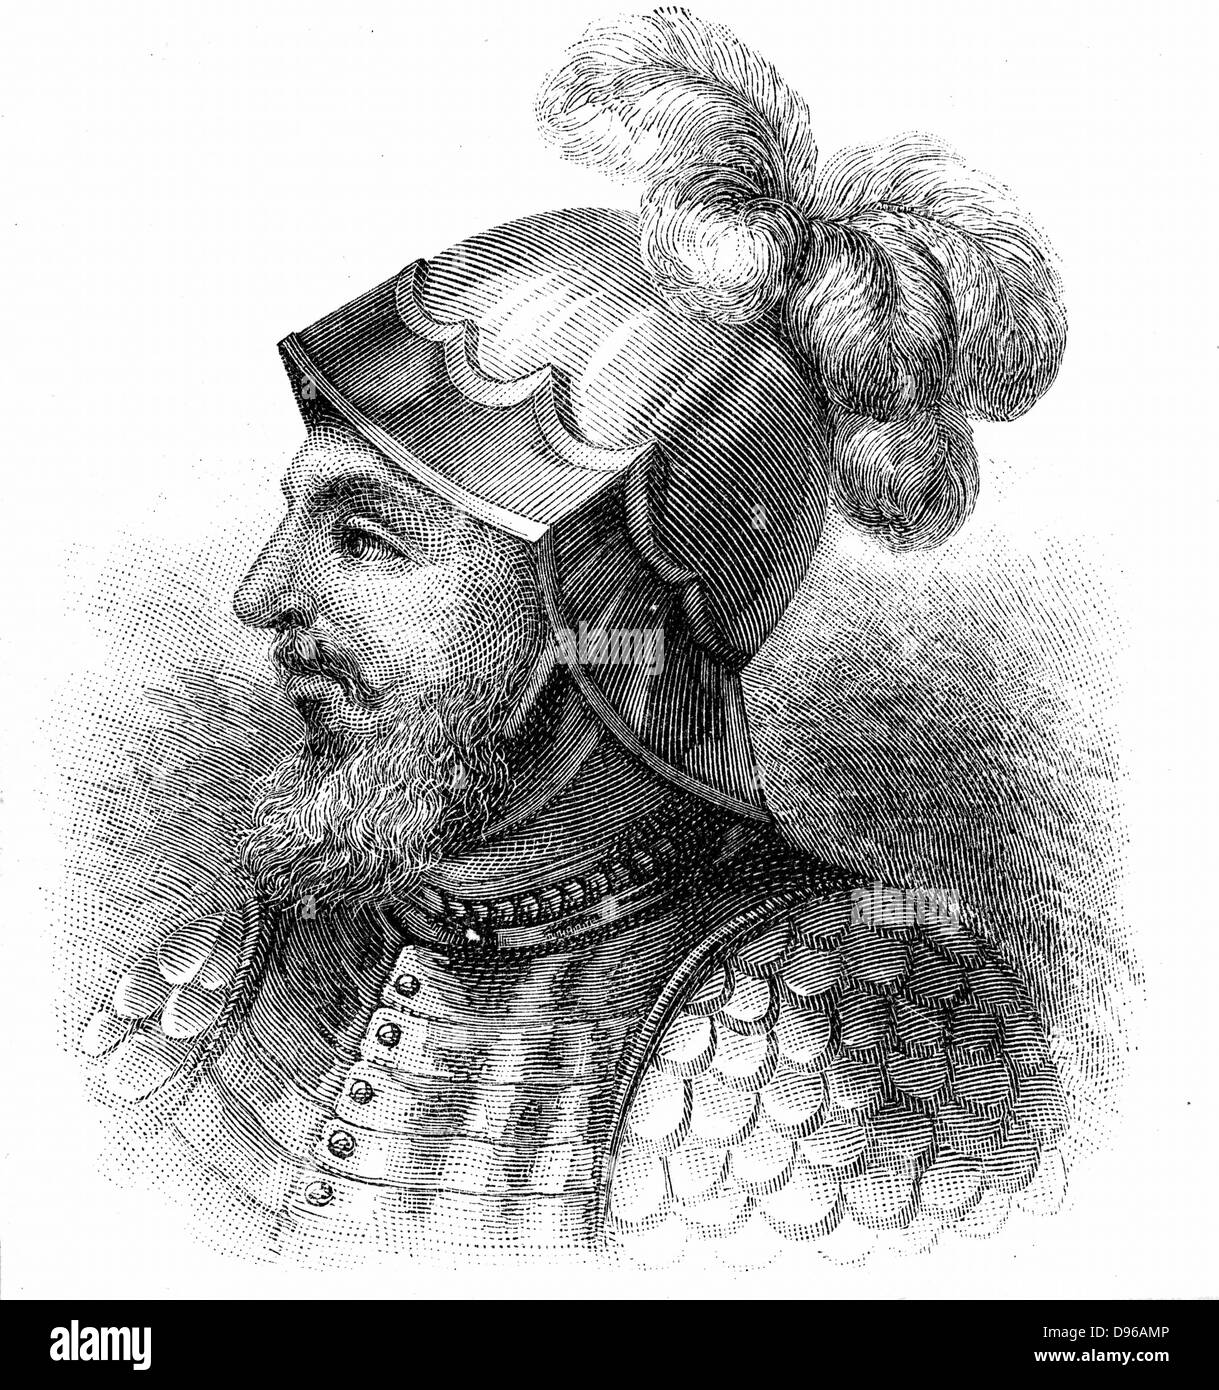 Vasco Nunez de Balbao (1475-1529) Spanish explorer; founded colony at Darien. First European to sight the Pacific Ocean. Engraving published late 19th century Stock Photo